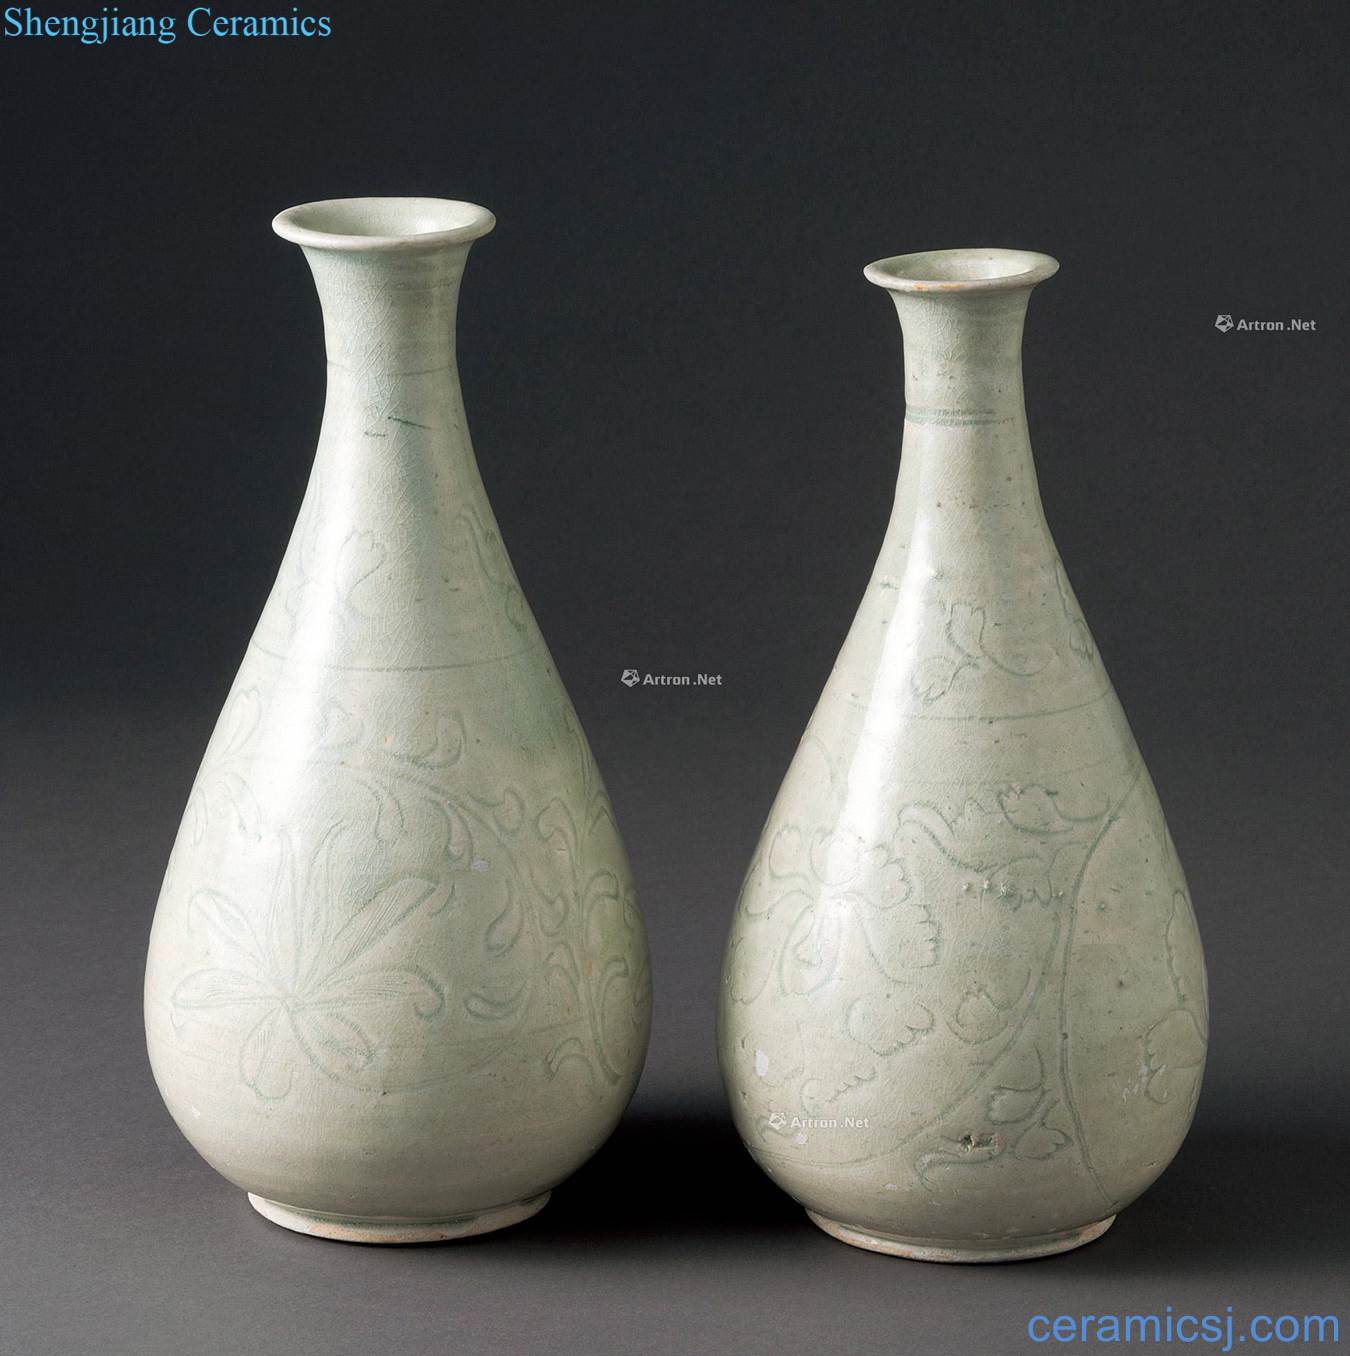 Song shadow carved green vase (a)